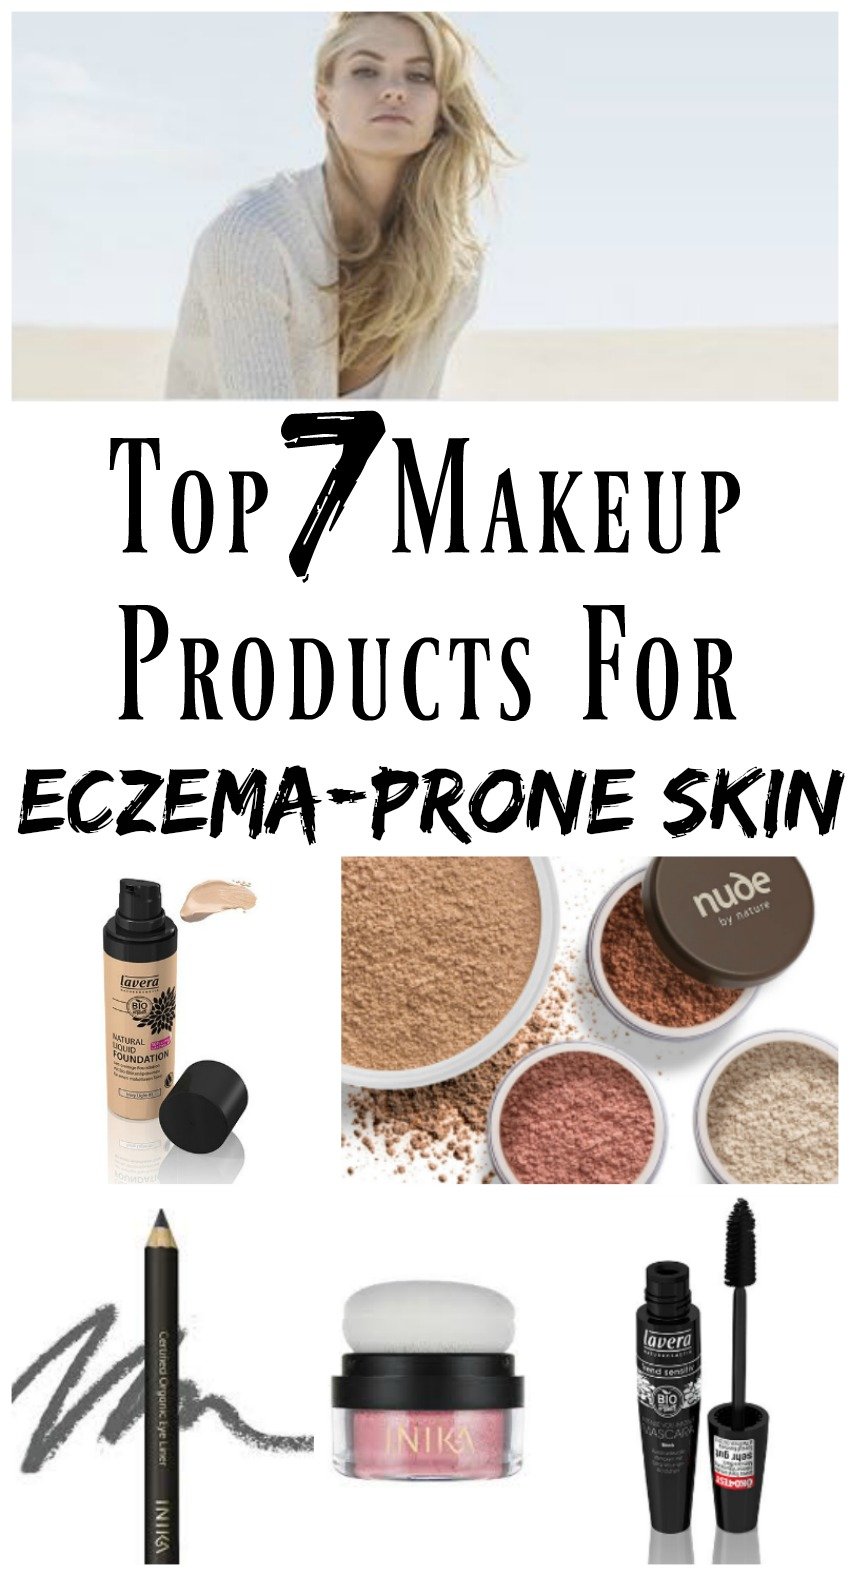 My Top 7 Makeup Products for Eczema Prone Skin.